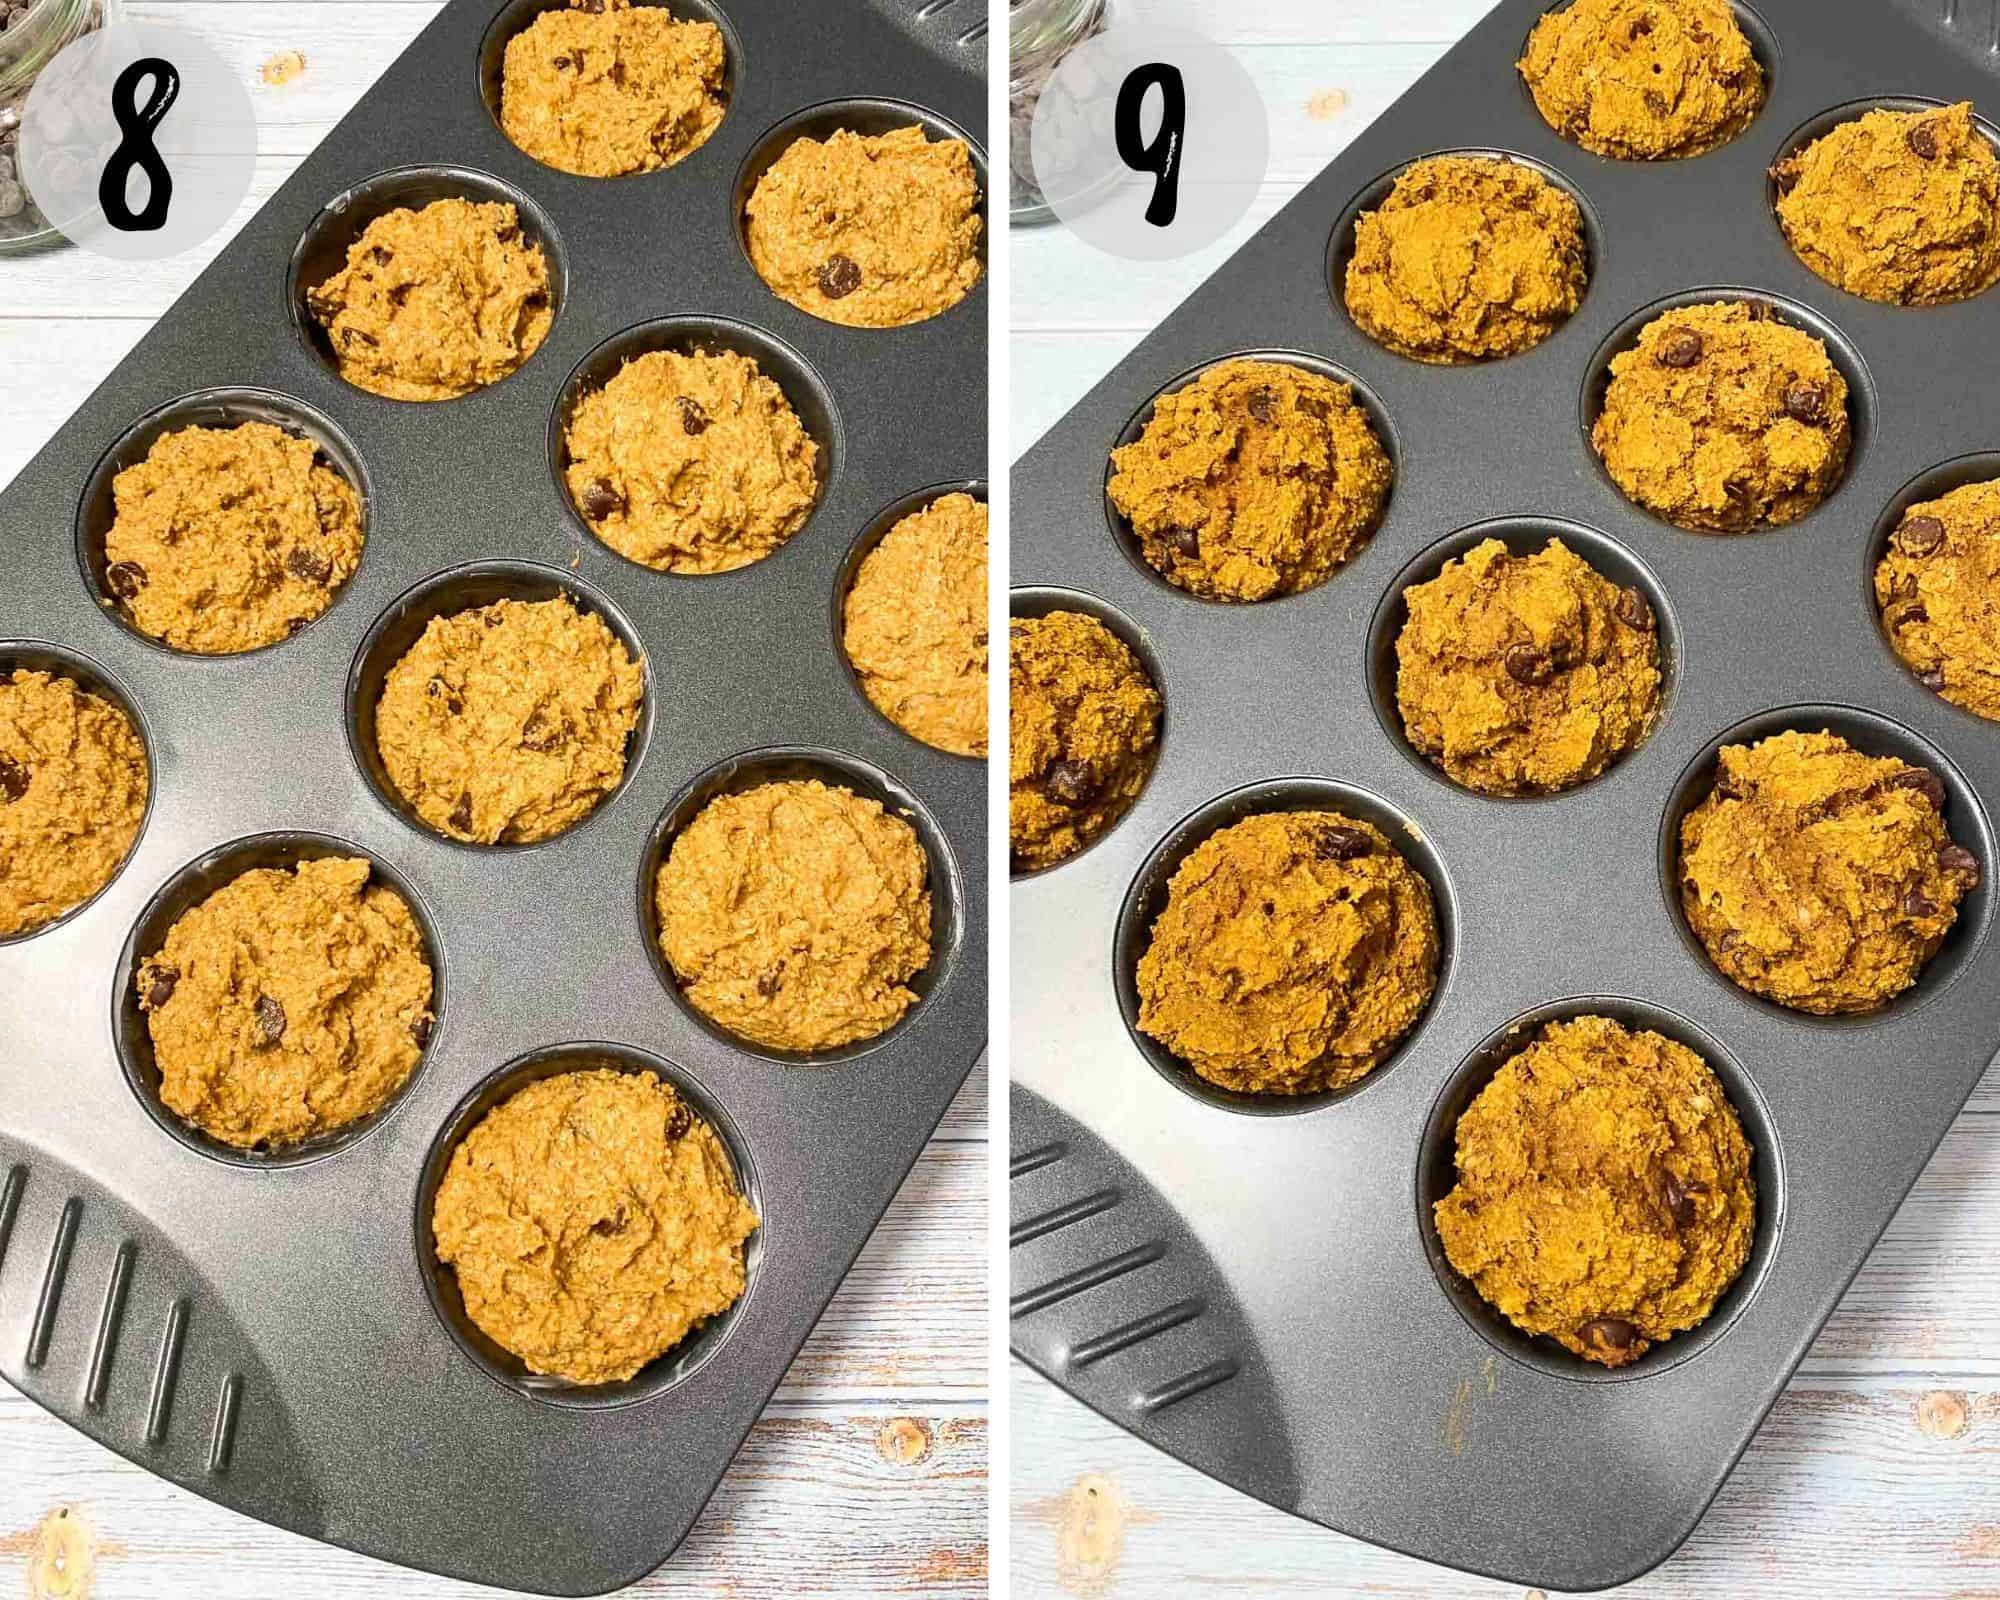 tray of muffins before and after baking